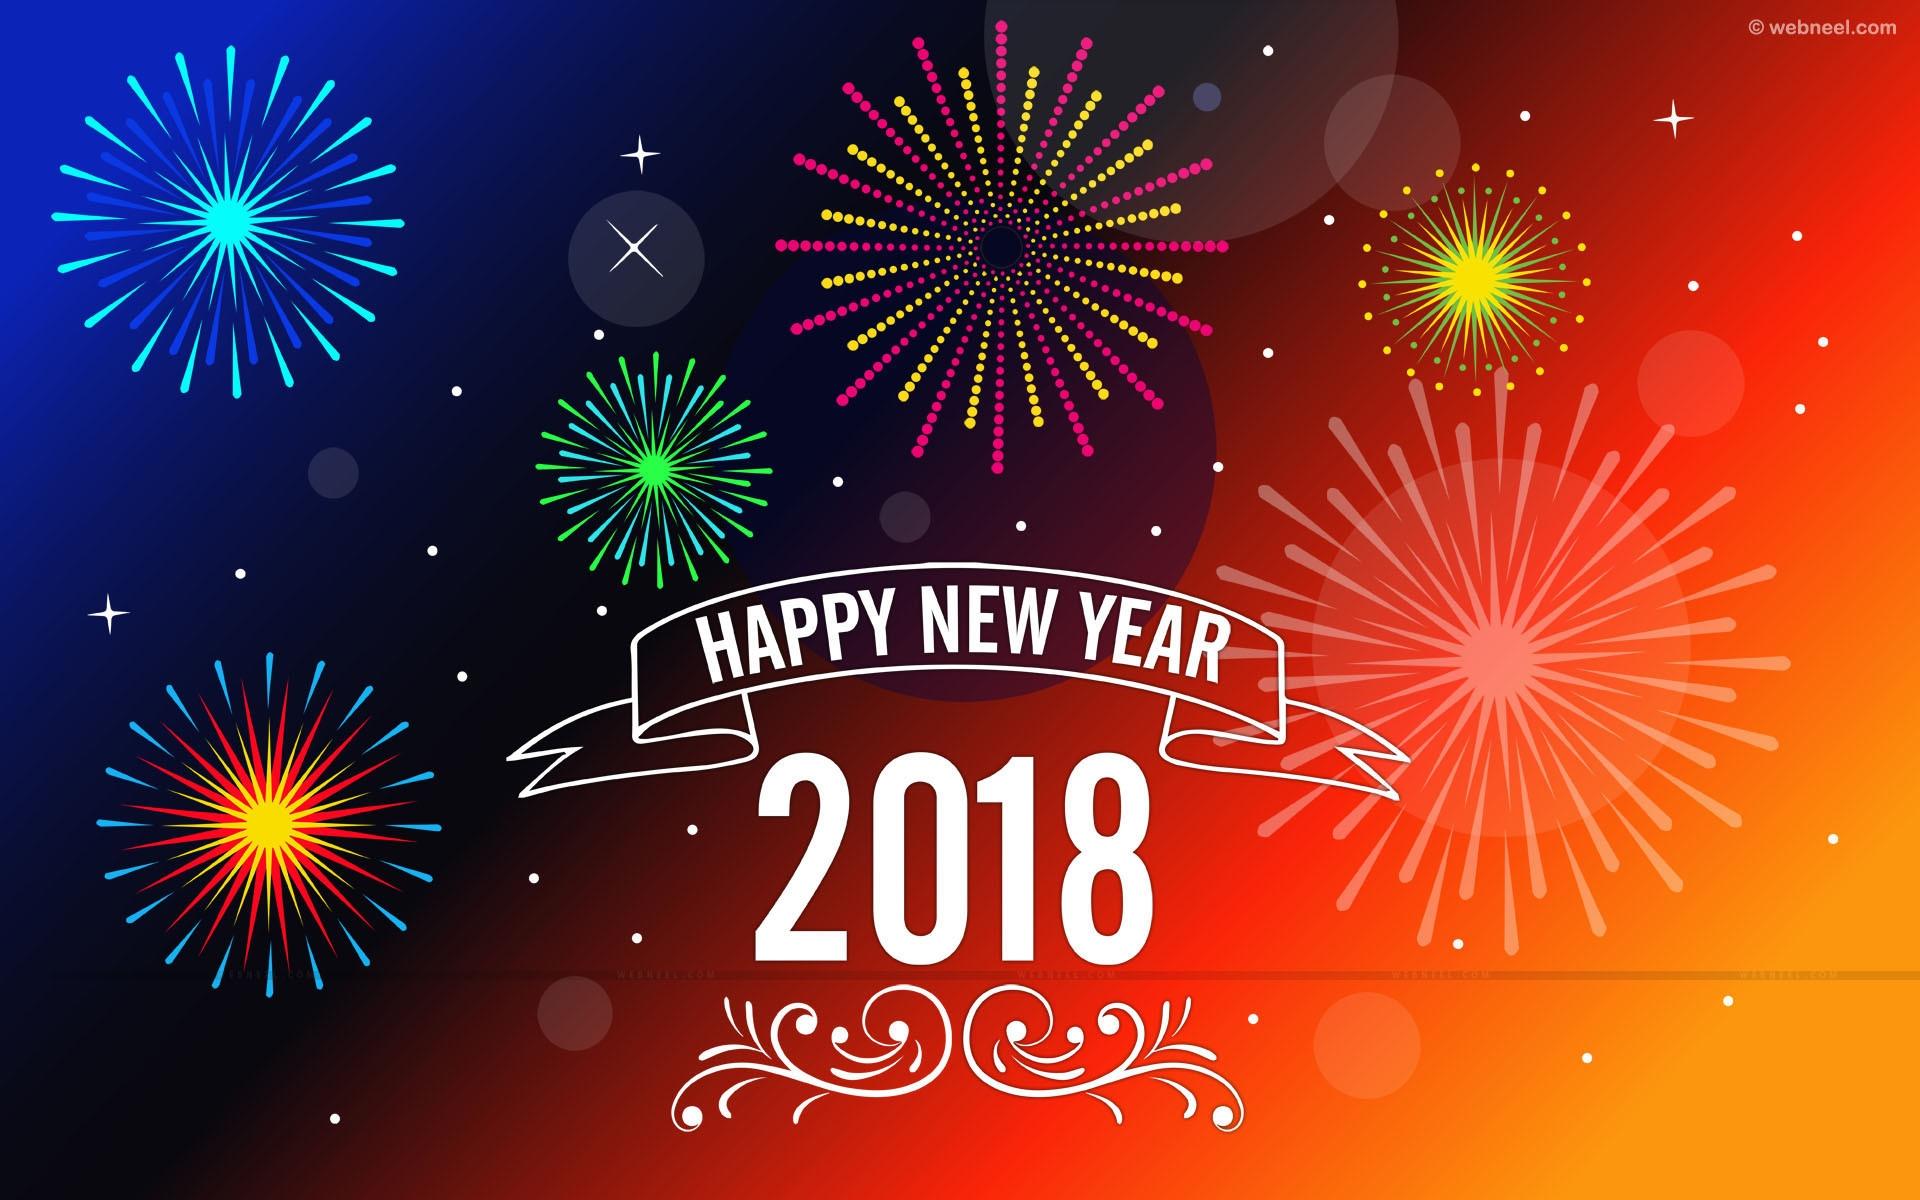 Happy New Year 2018 Wallpapers